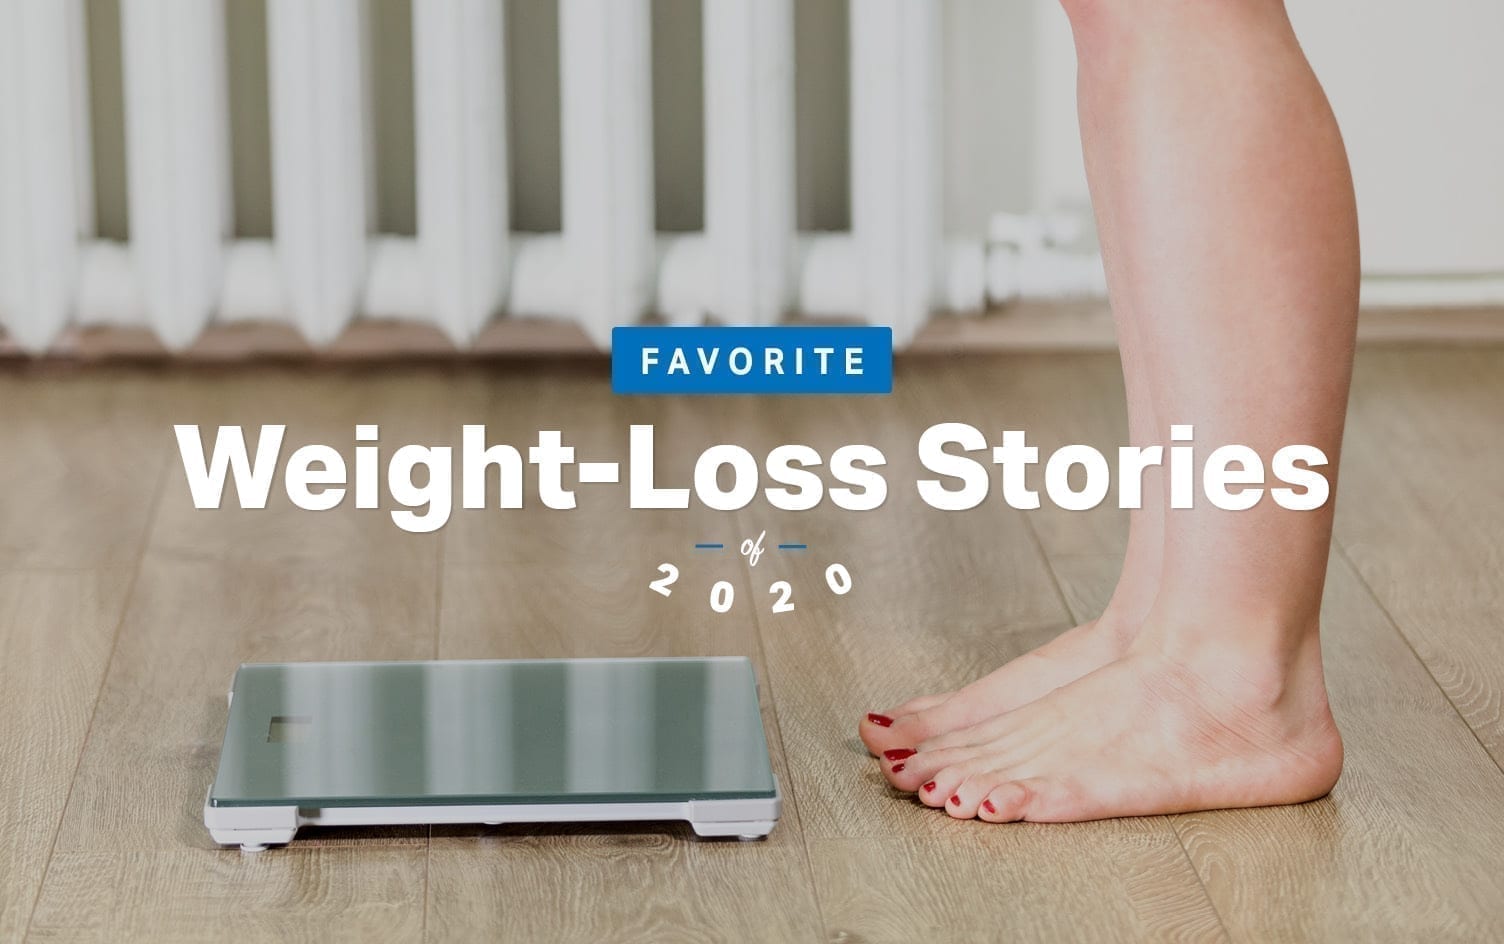 11 Favorite Weight-Loss Stories of 2020